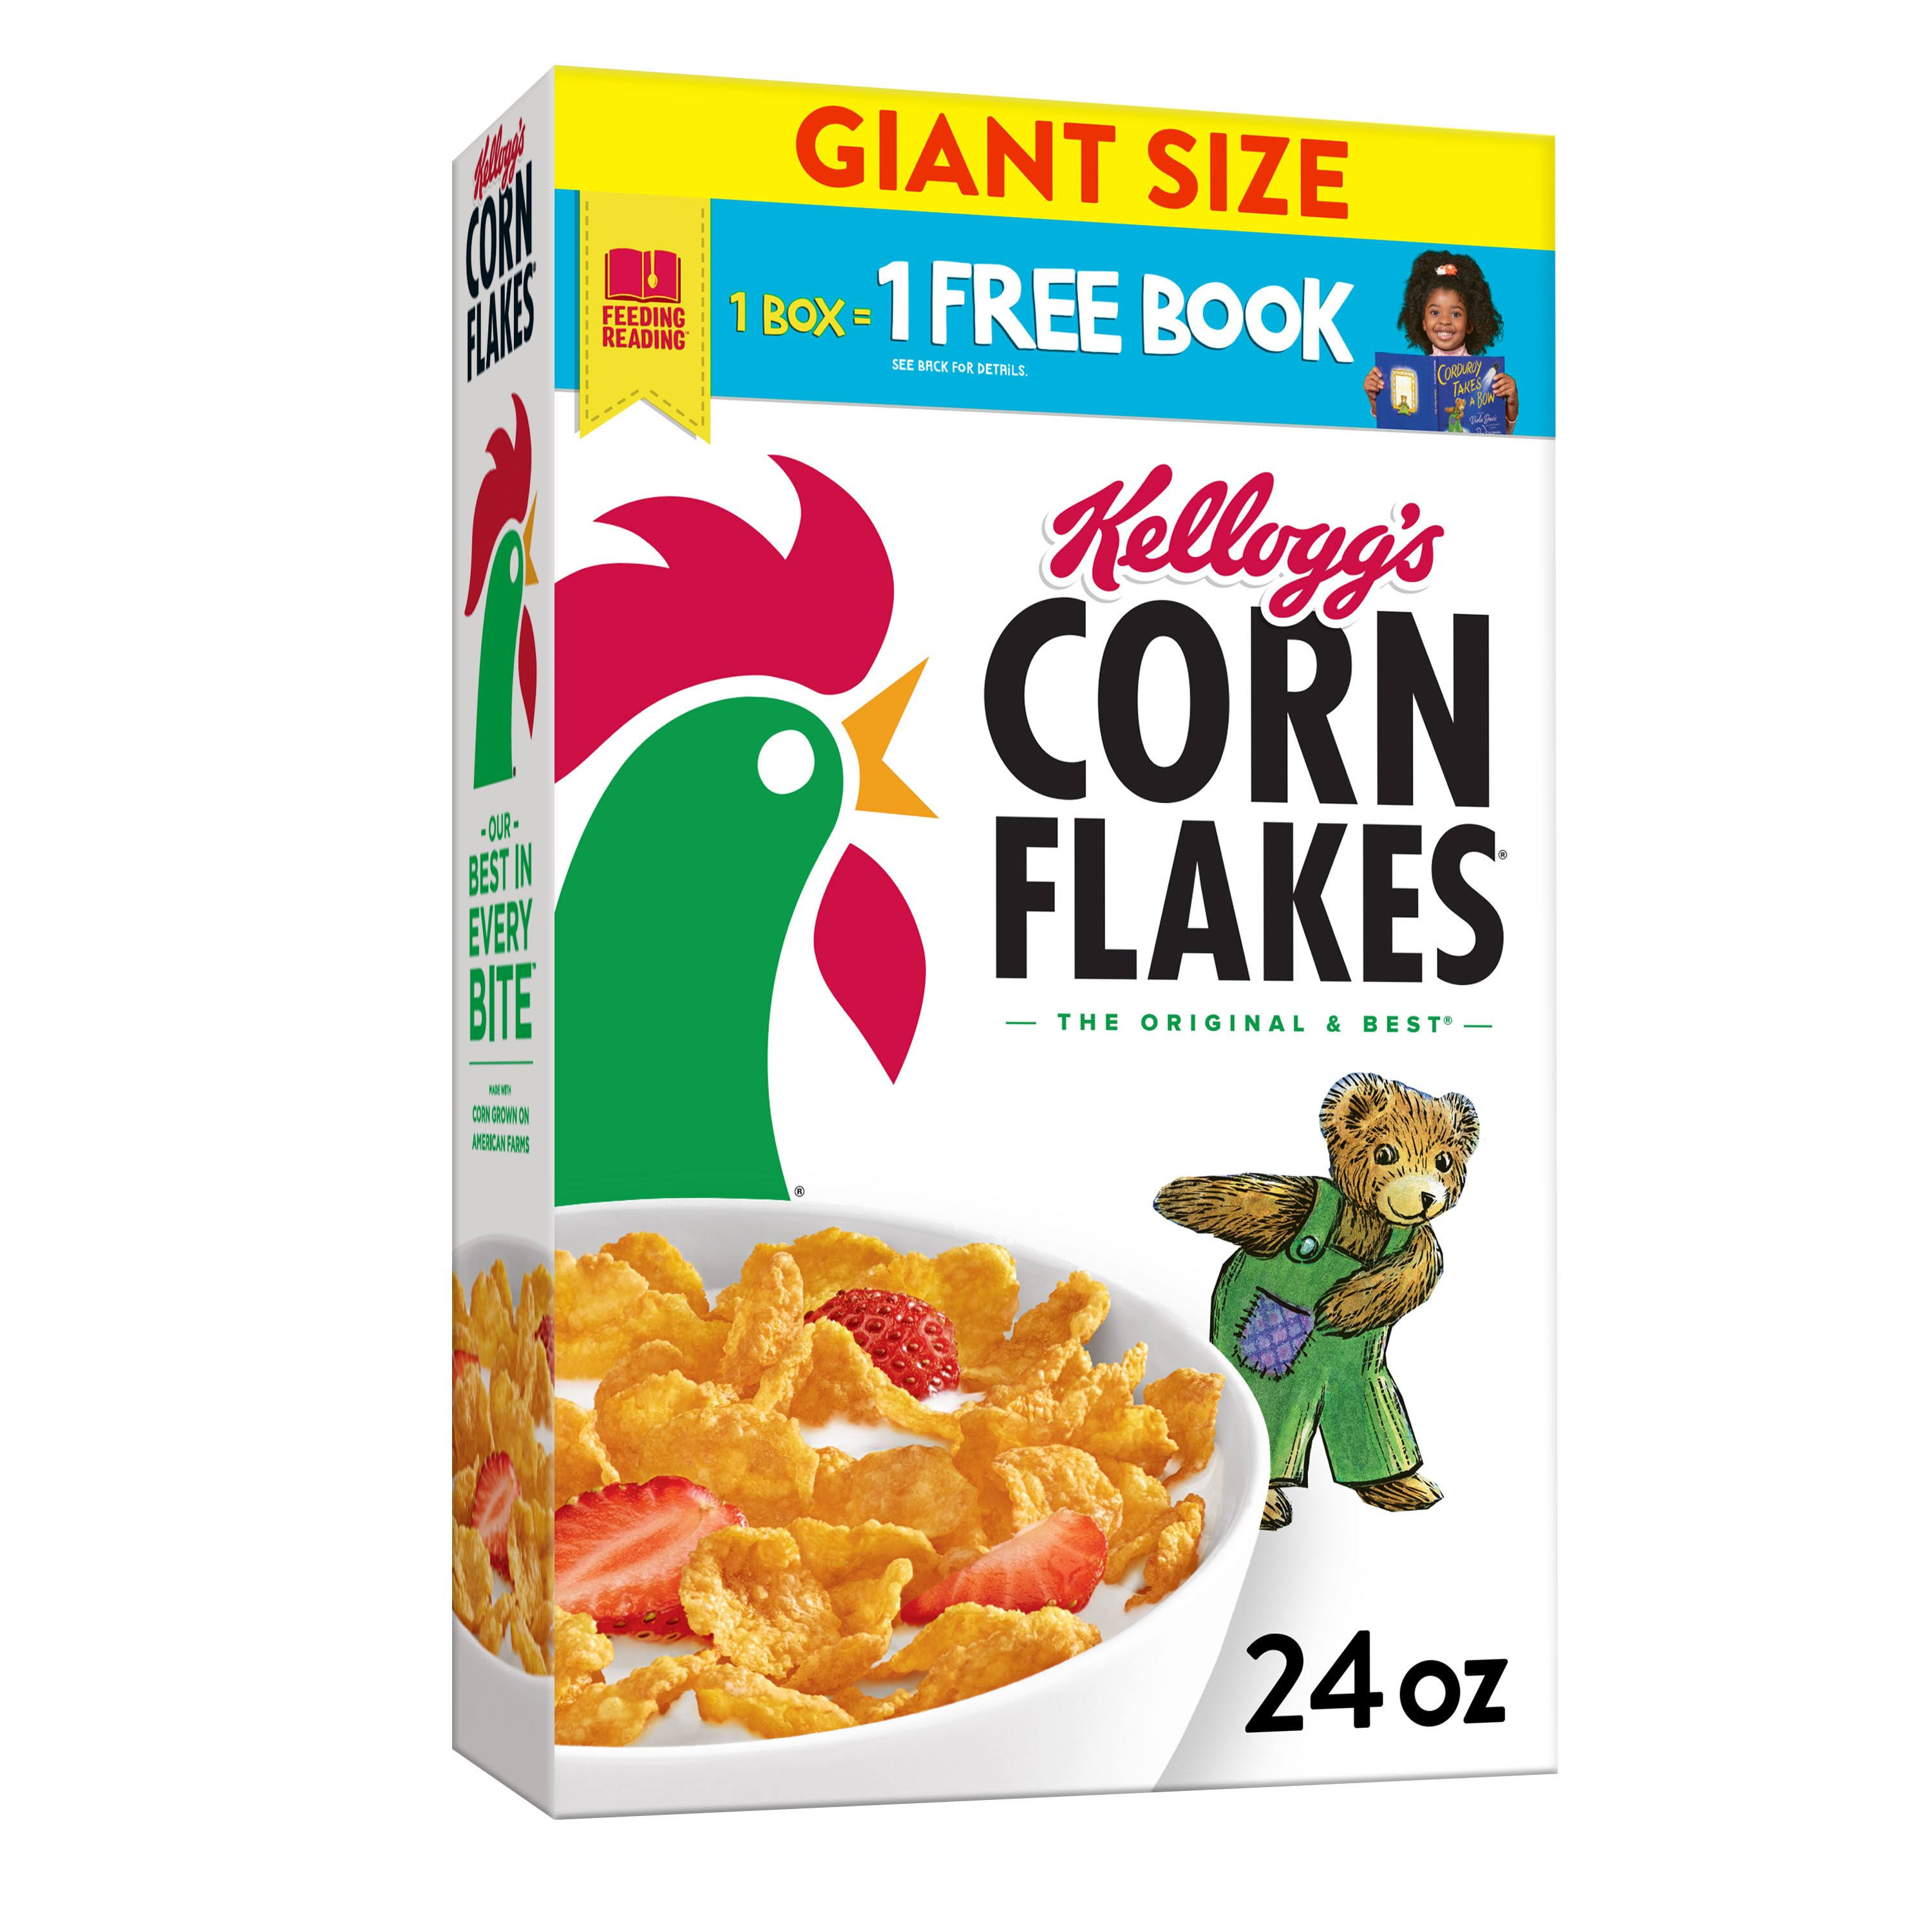 Corn Flakes Cereal, Giant Size - 24 oz